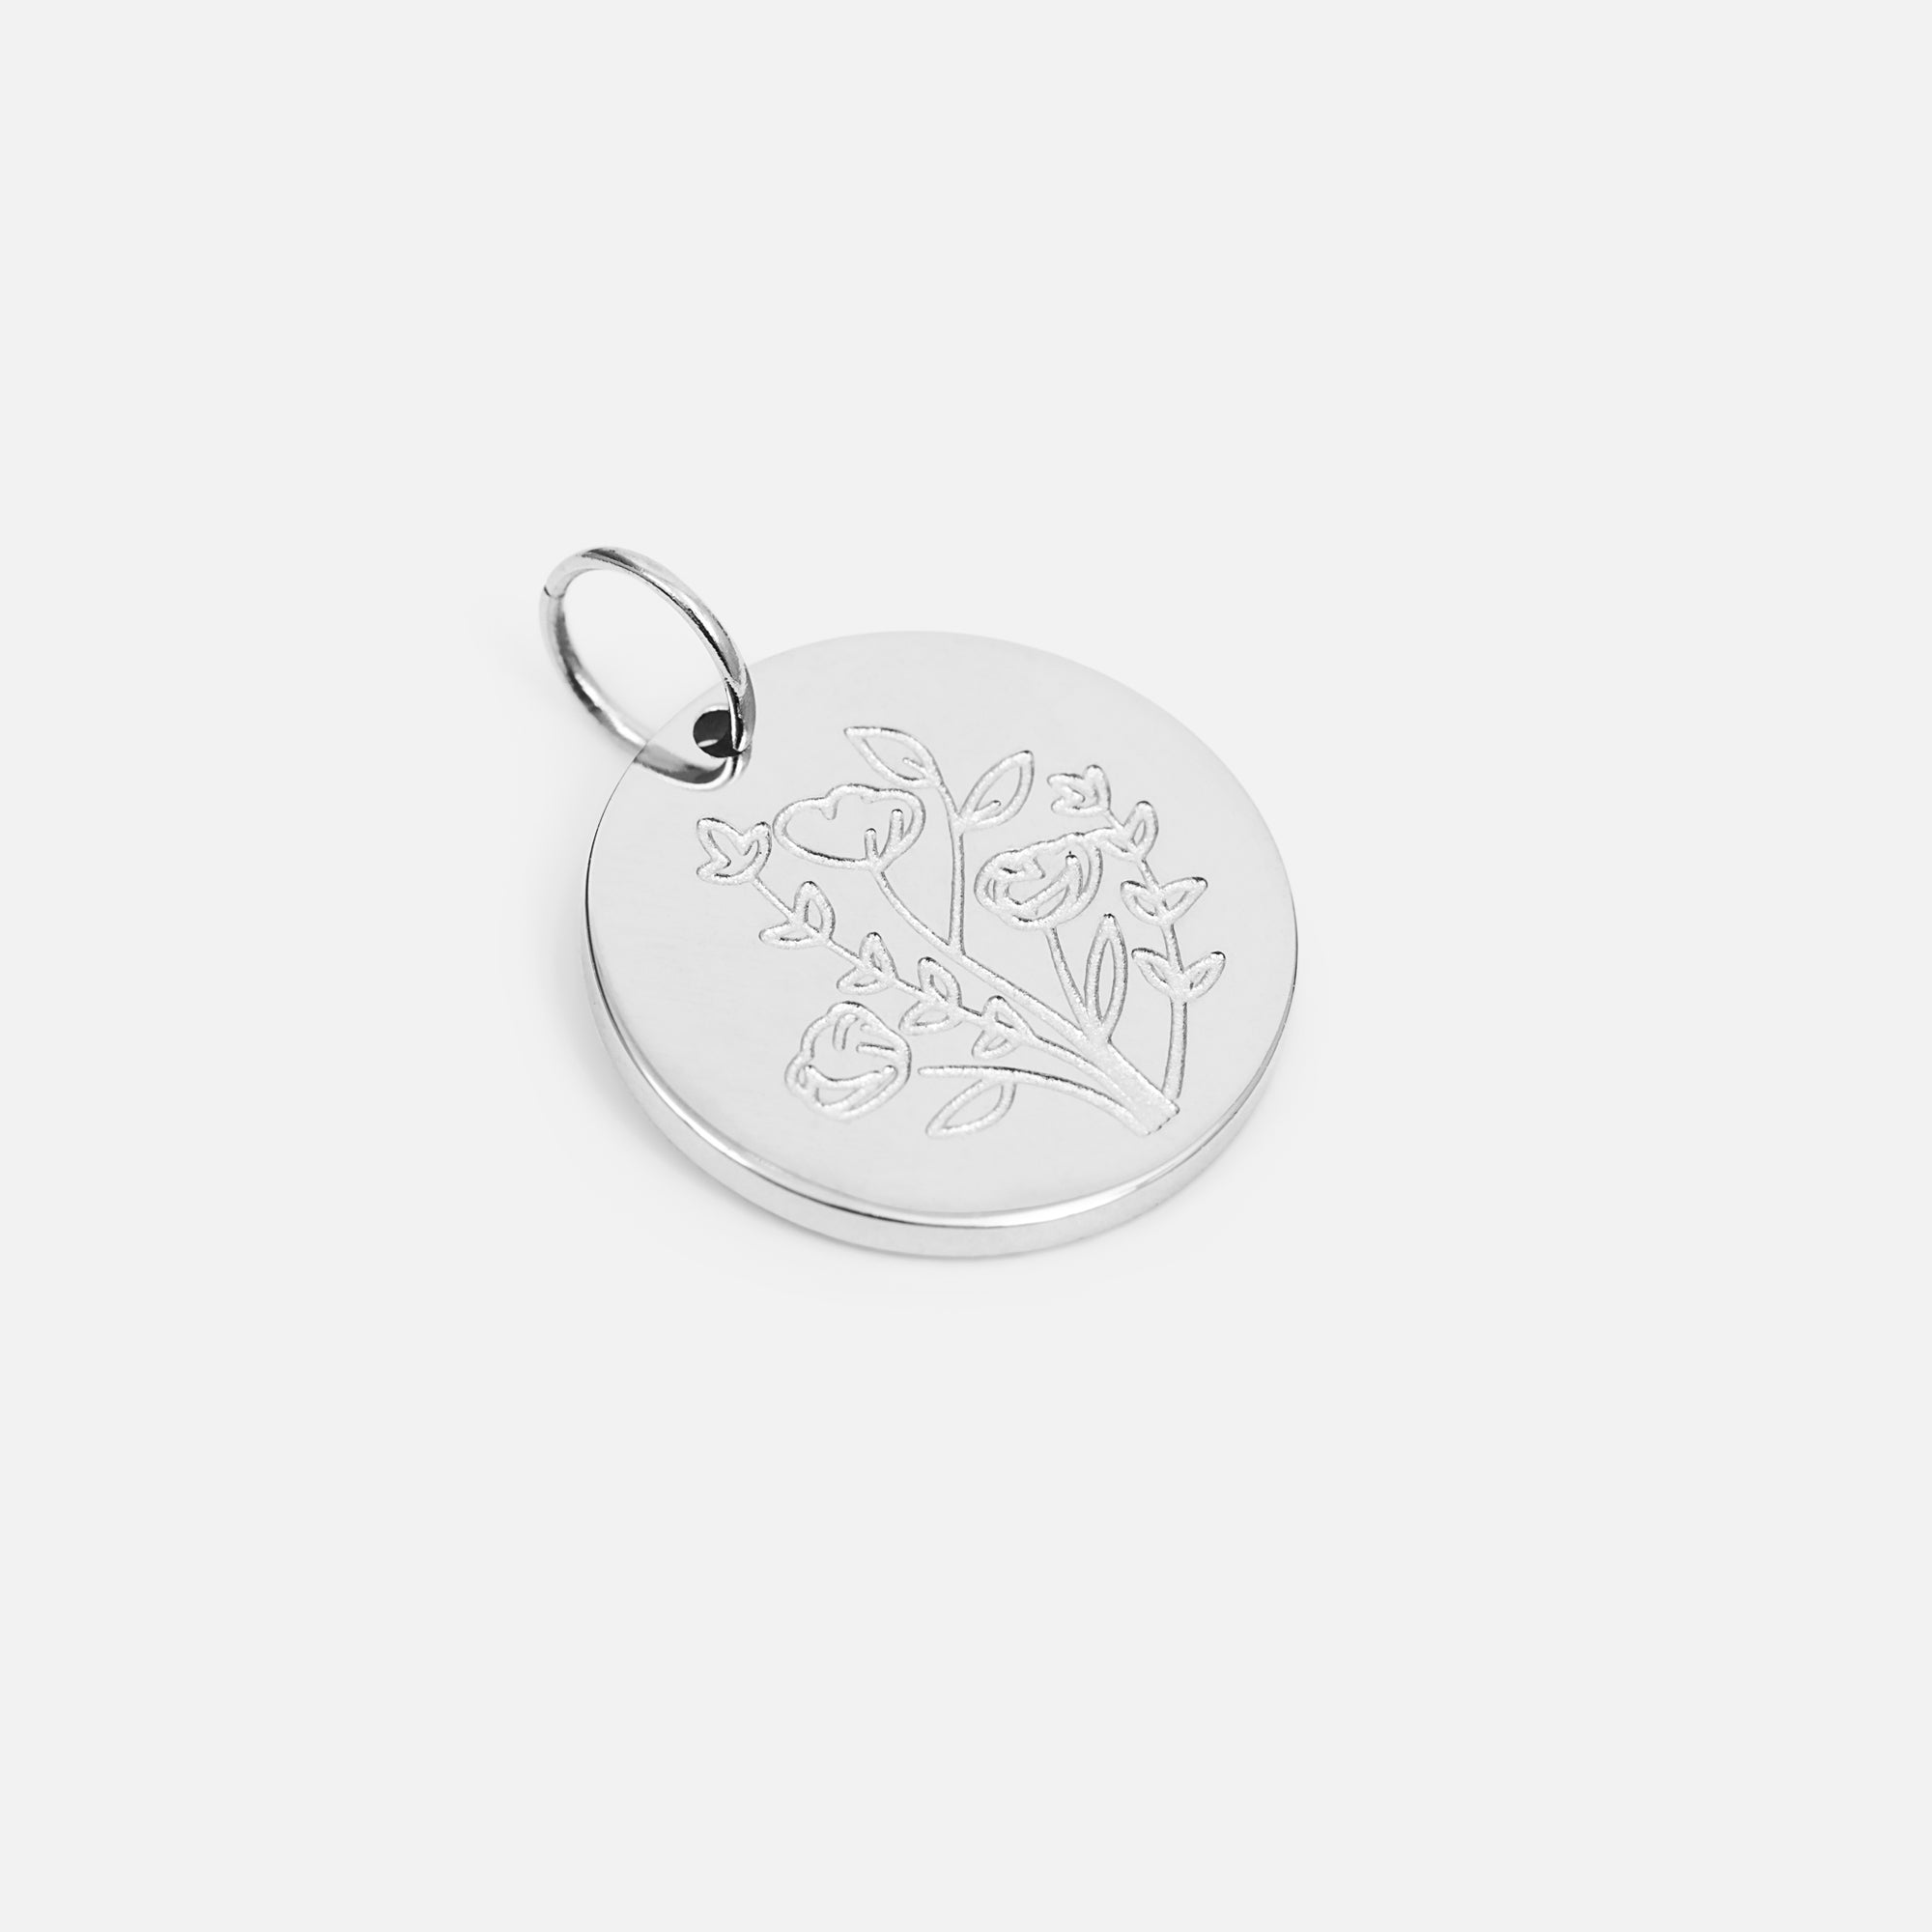 Small symbolic silvered charm engraved "flower bouquet"